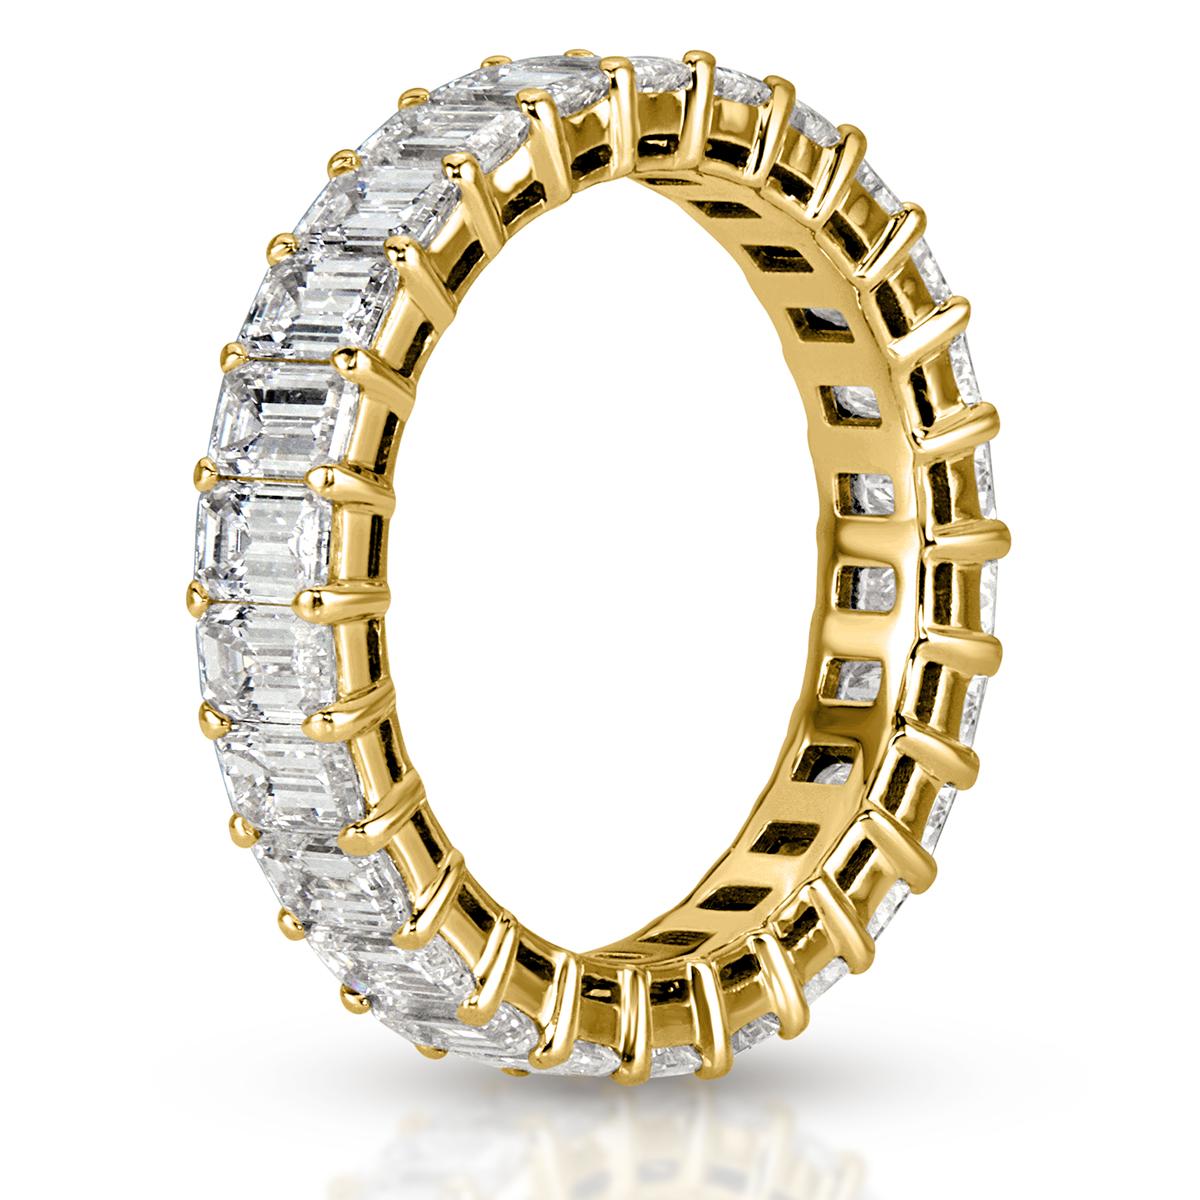 This gorgeous diamond eternity band showcases 4.00ct of perfectly matched emerald cut diamonds graded at F-G, VVS2-VS1. The diamonds are hand set in 18k yellow gold. All eternity bands are shown in a size 6.5. We custom craft each eternity band and